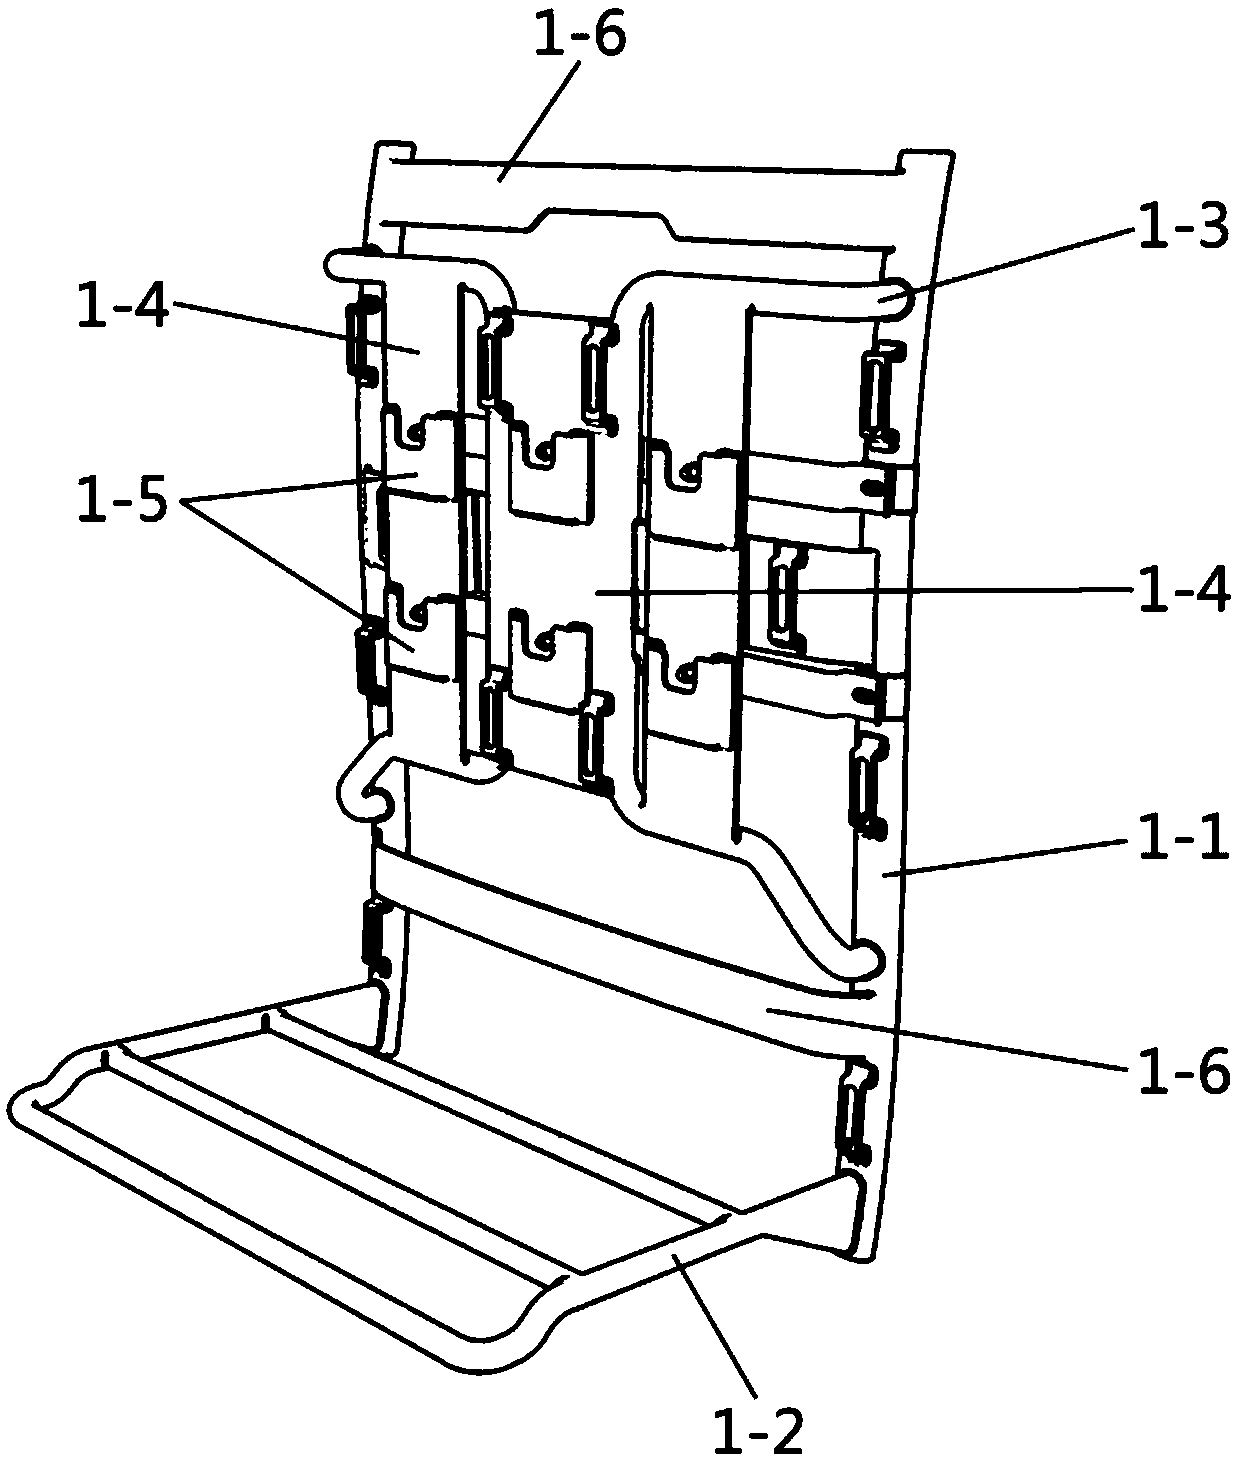 Portable carrying device